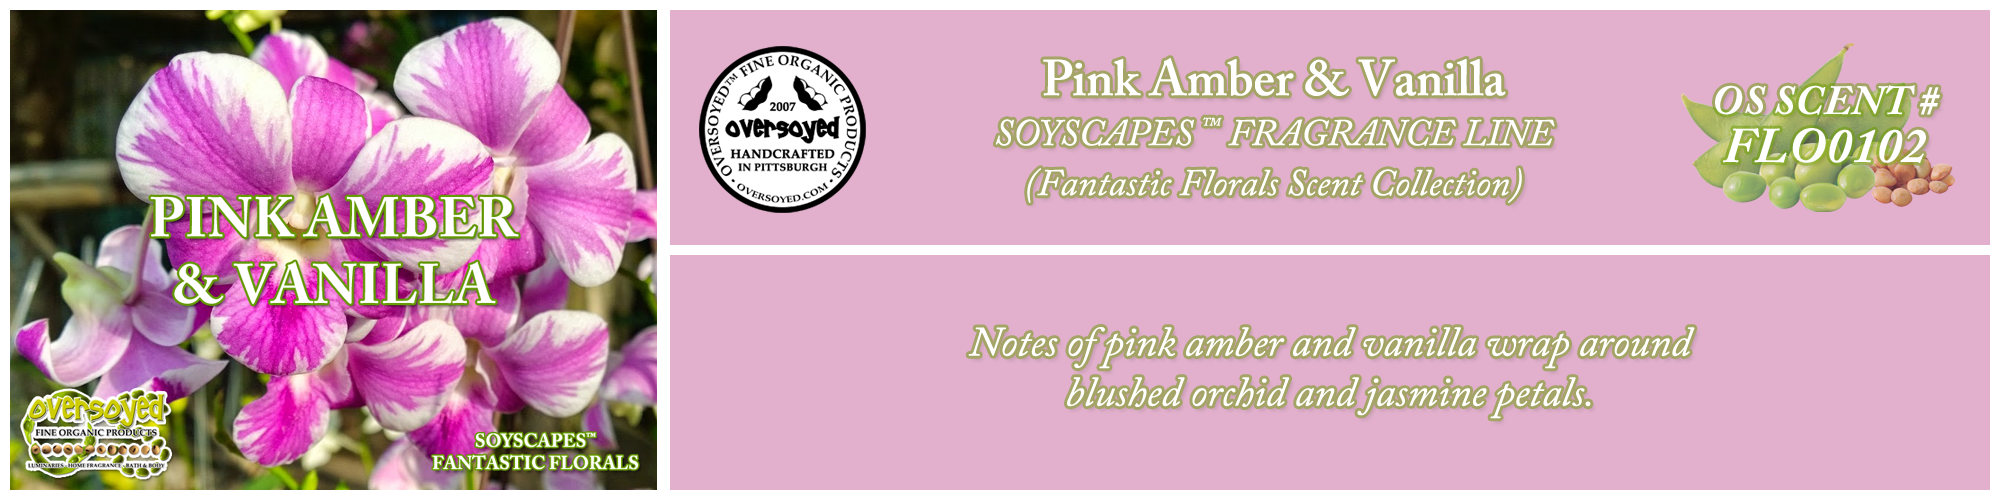 Pink Amber & Vanilla Handcrafted Products Collection